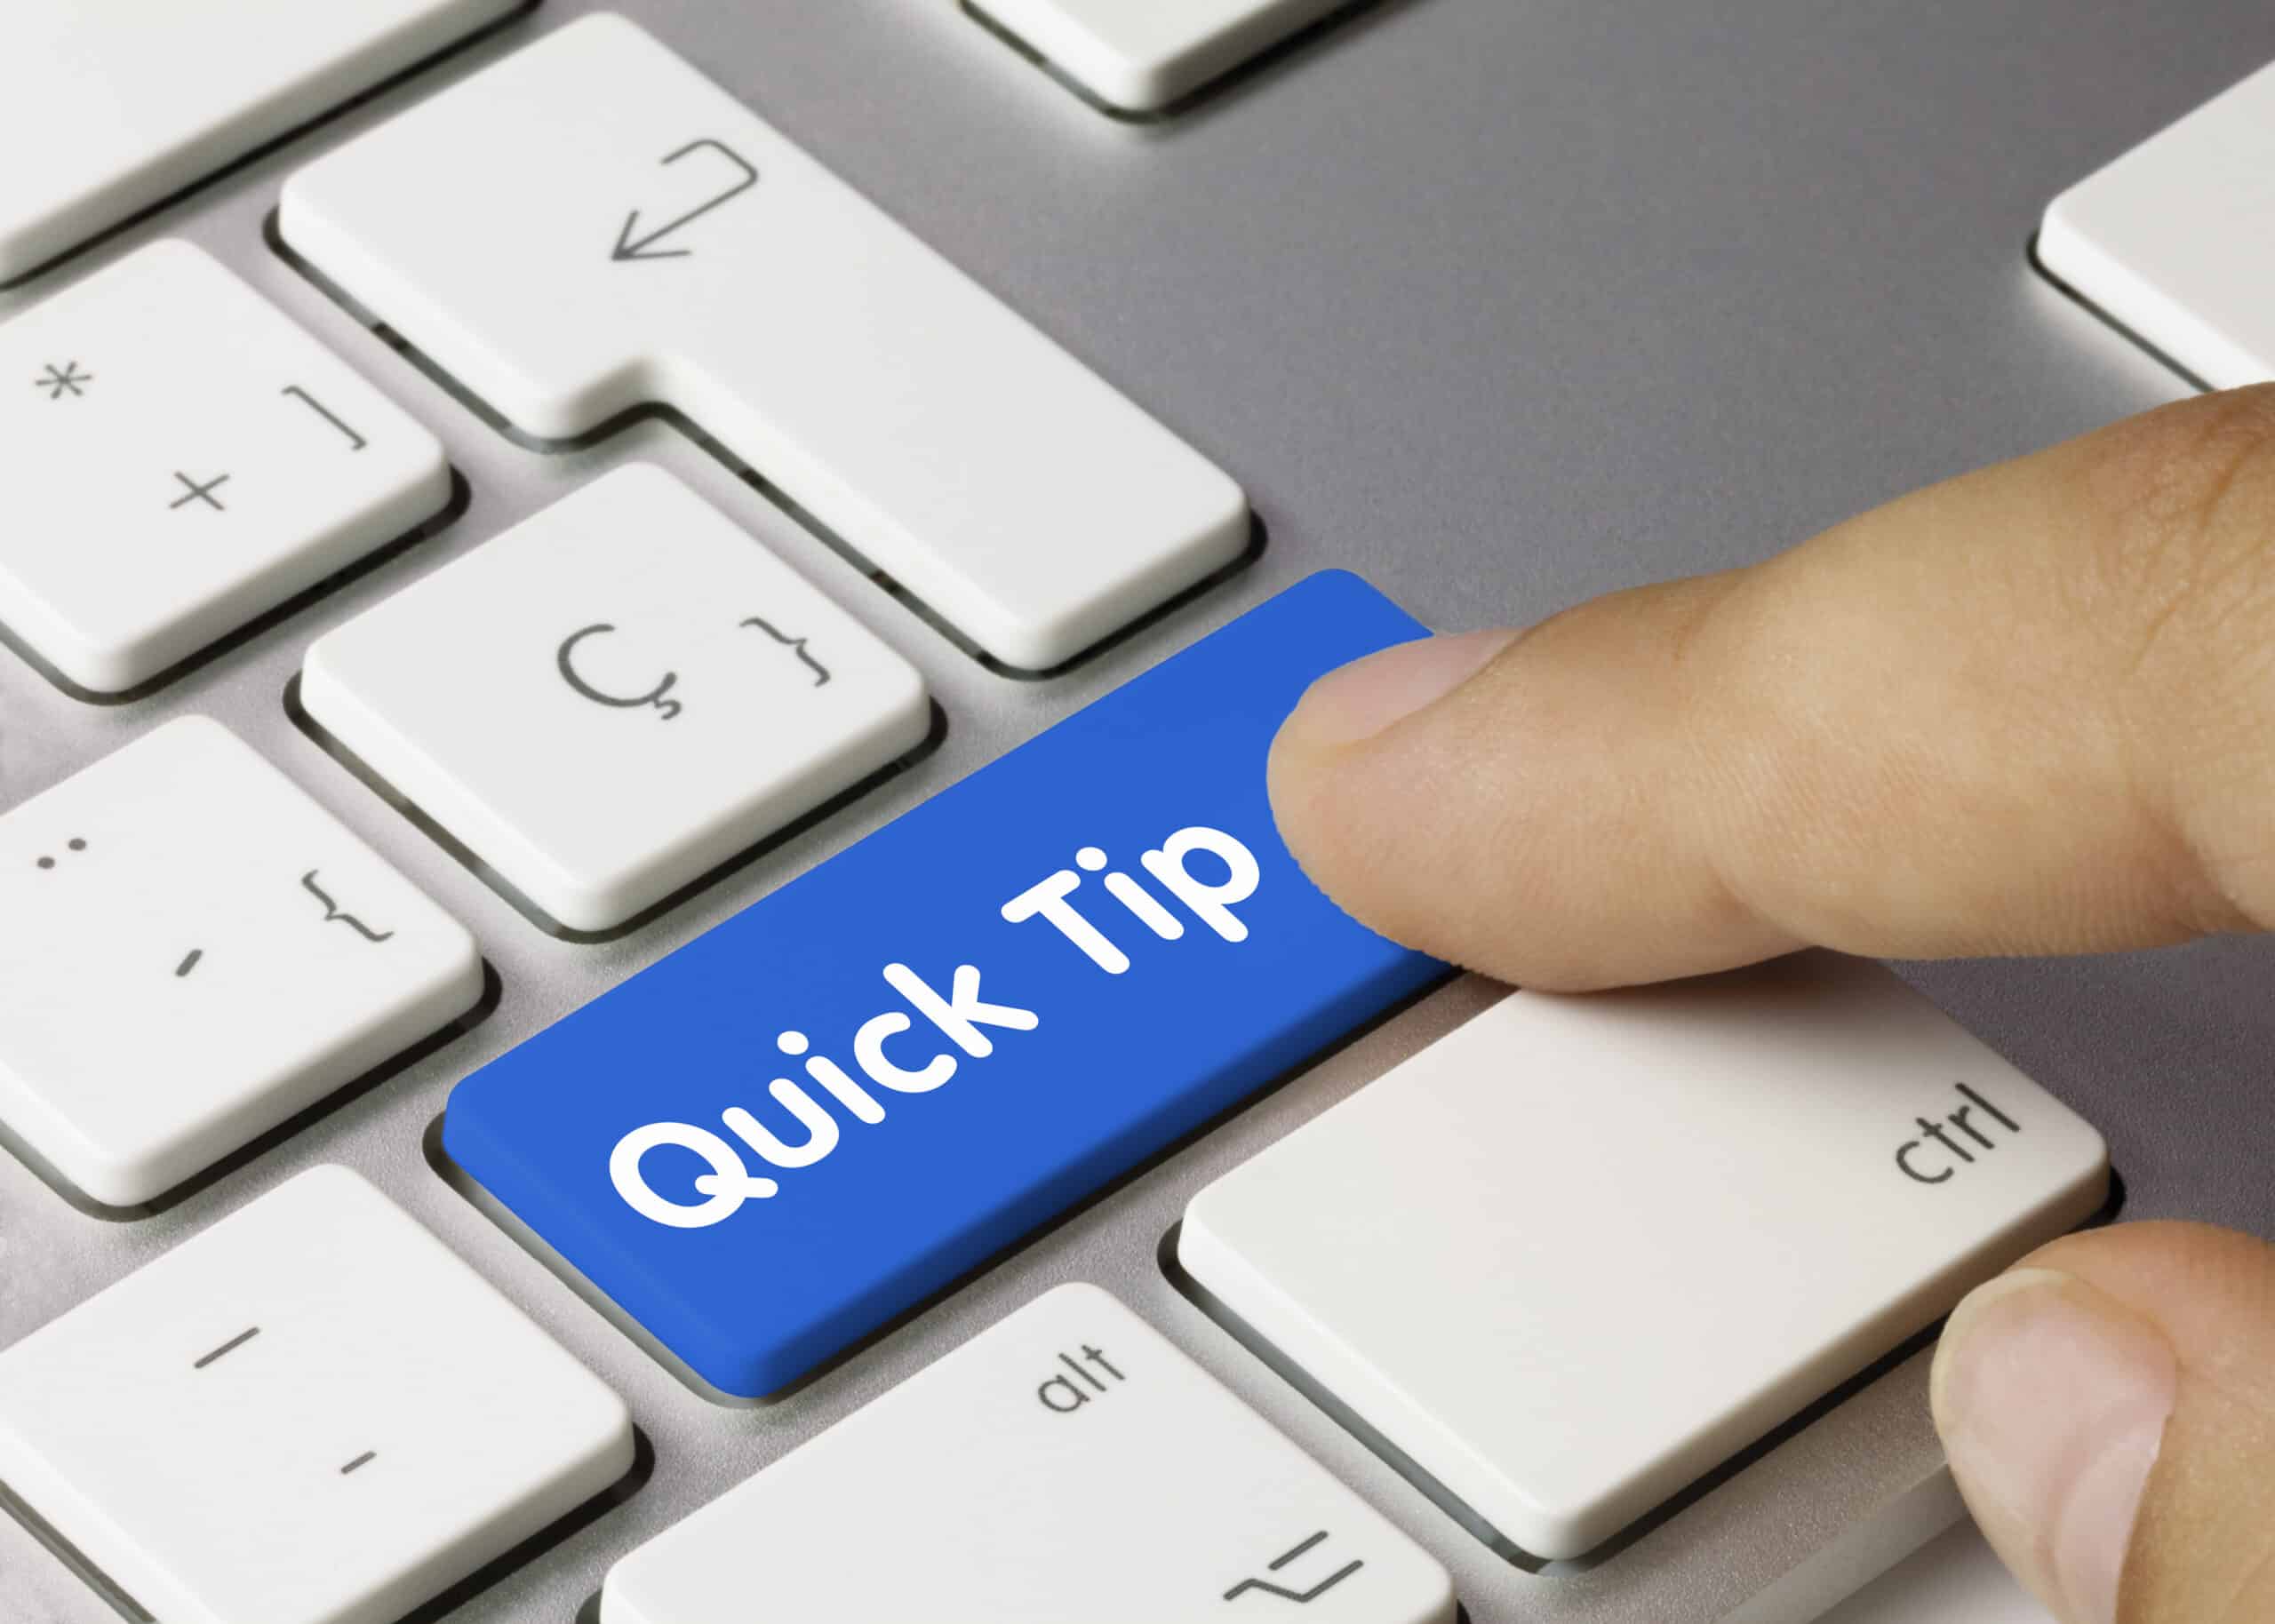 Quick Tip on a blue enter key on a keyboard